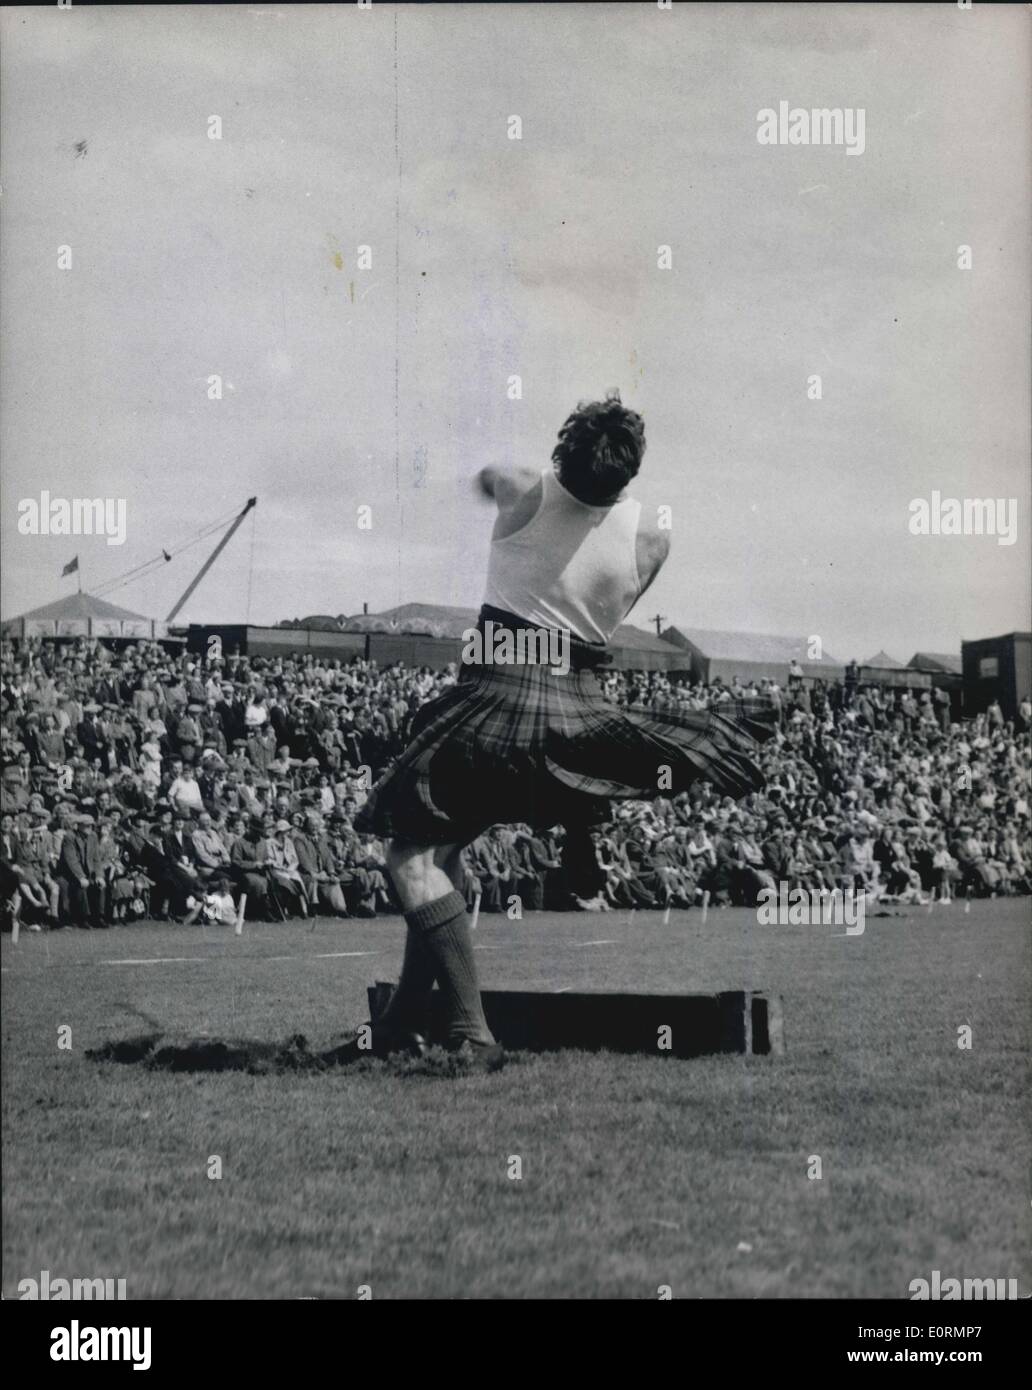 Jan. 01, 1960 - Crieff Highland gathering at Market Park, Crieff: L.K. Stewart of Fort William whirla round and round he makes a record throw for the 22lb Hammer of a distance of 110ft. 6 1/2 inches. He wears the Hunting Stewart tartan. (exact date unknown) Stock Photo